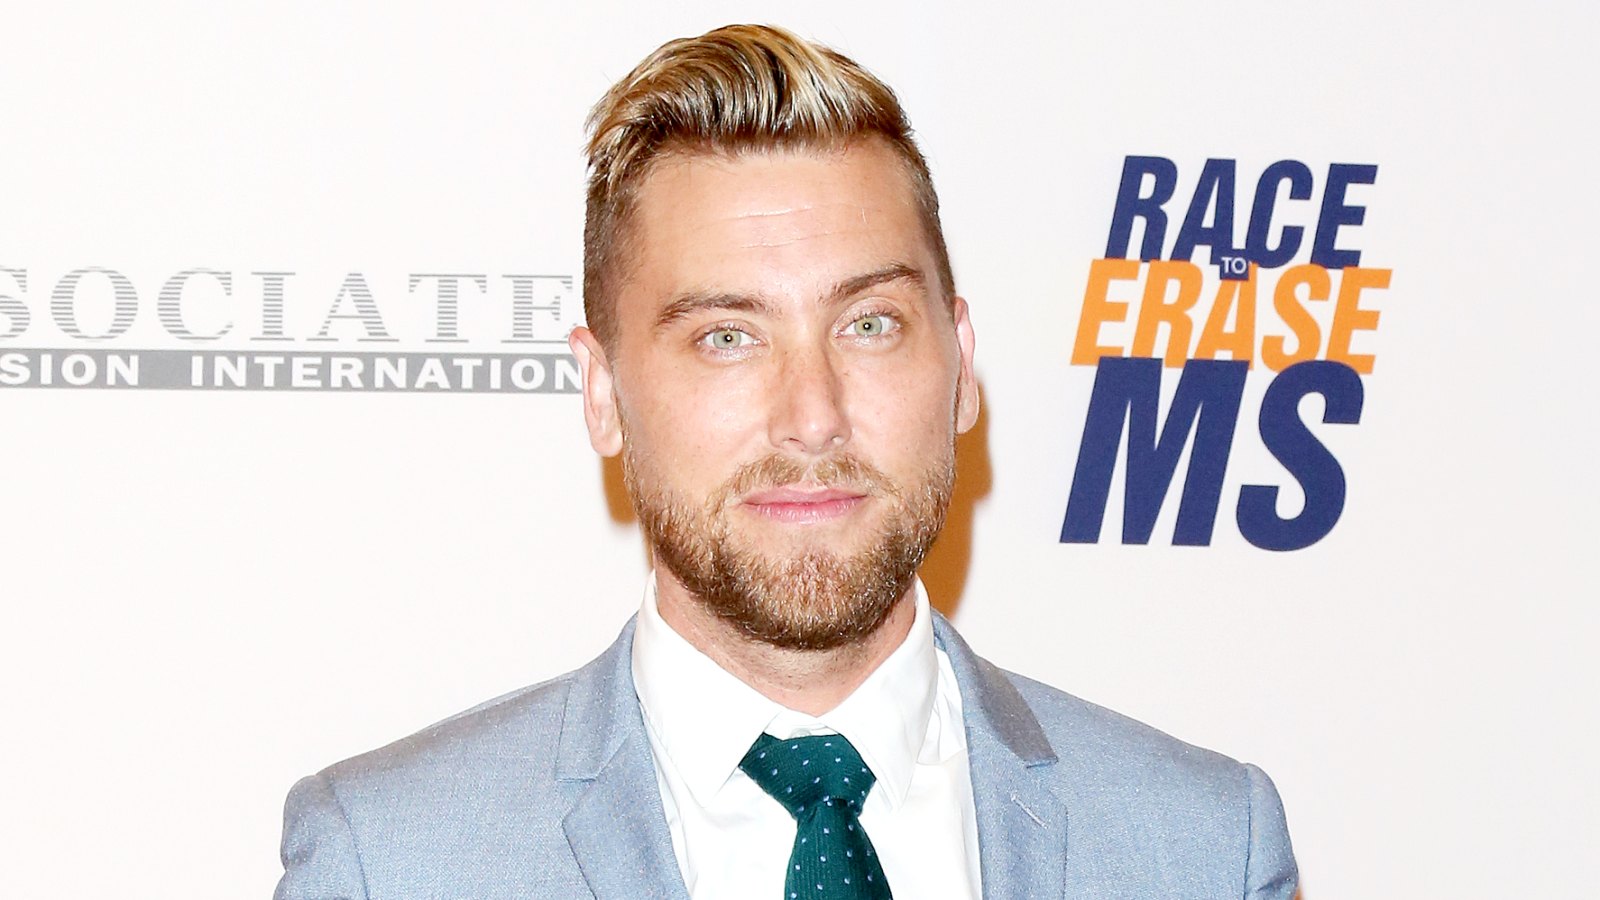 Lance Bass attends the 24th annual Race To Erase MS Gala at The Beverly Hilton Hotel on May 5, 2017 in Beverly Hills, California.